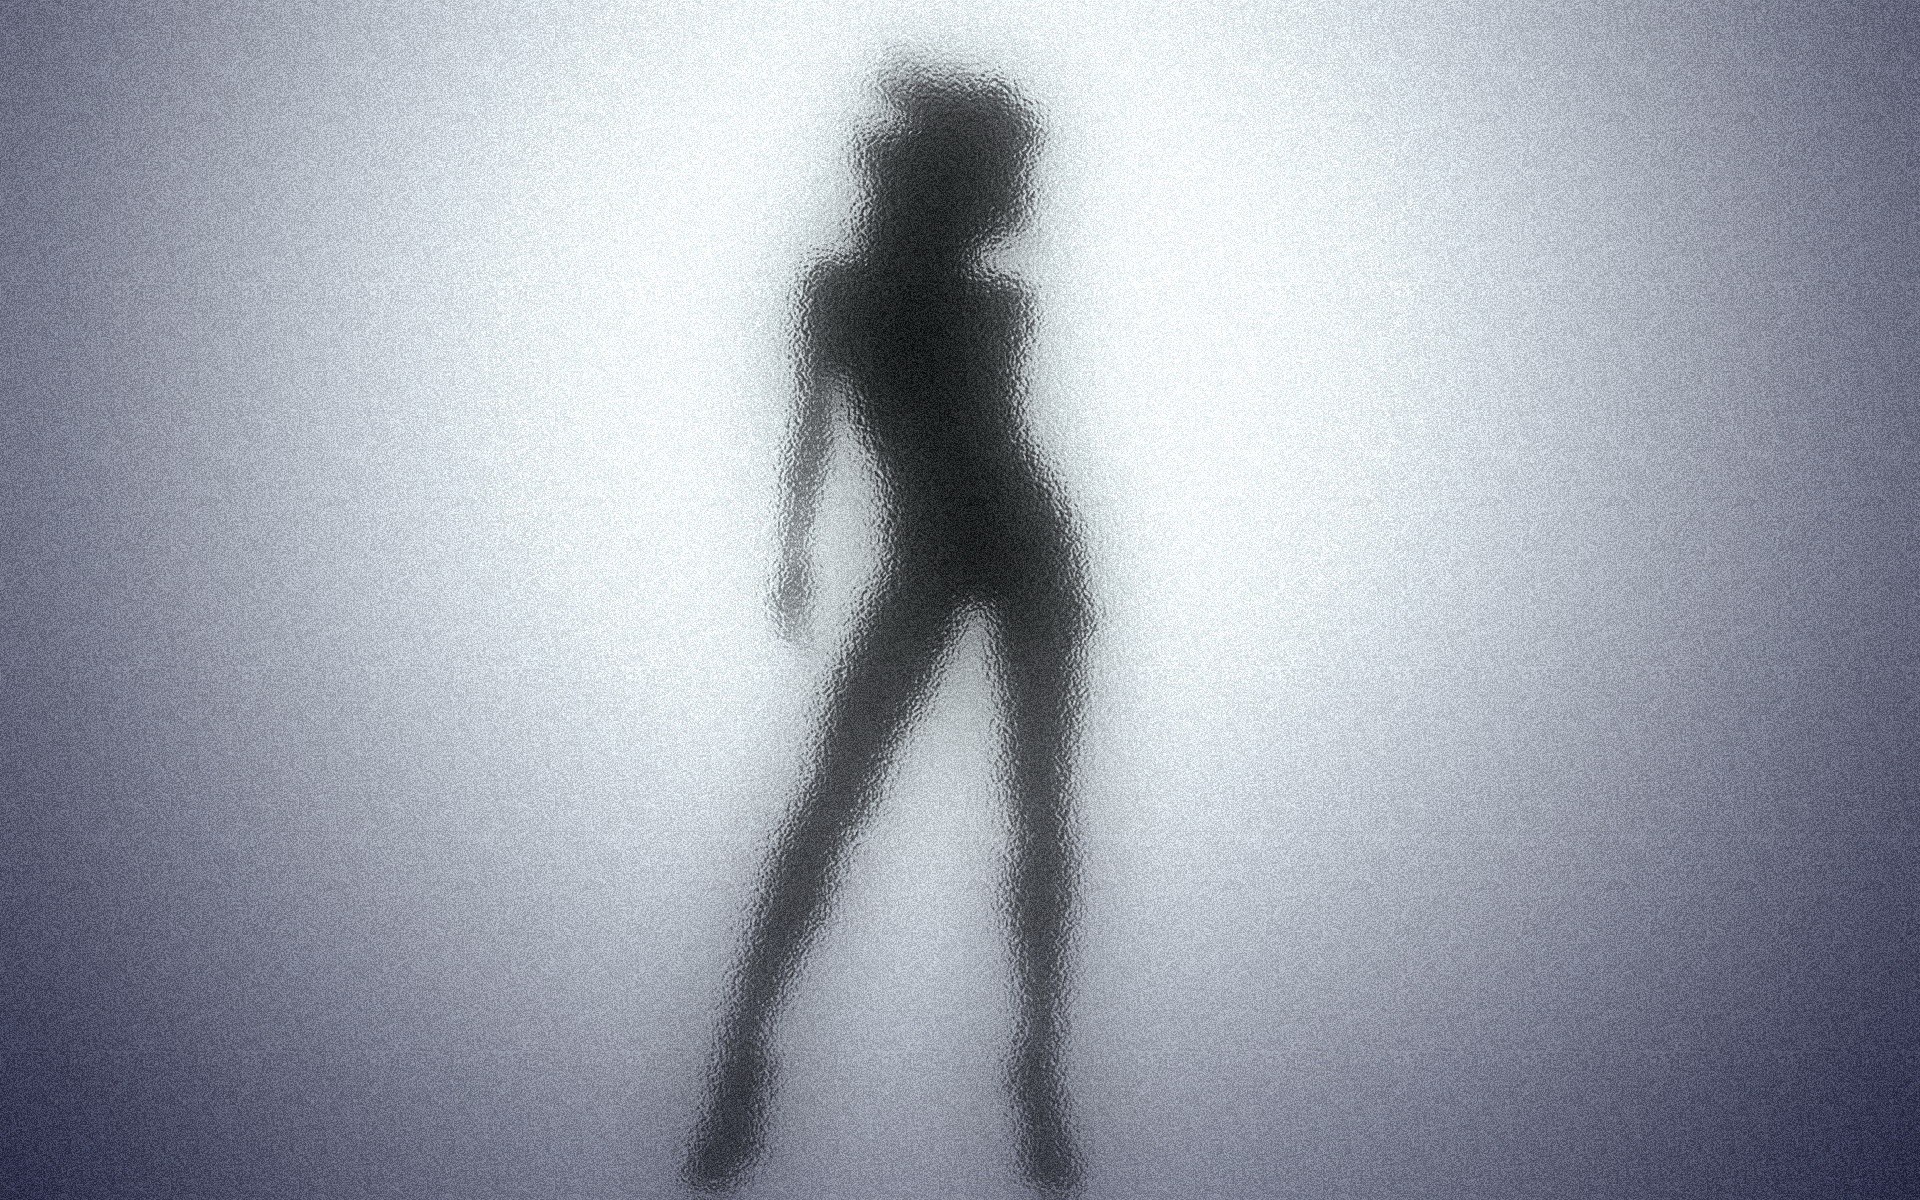 People 1920x1200 silhouette shadow behind the glass standing legs erotic art  blurred outline women simple background